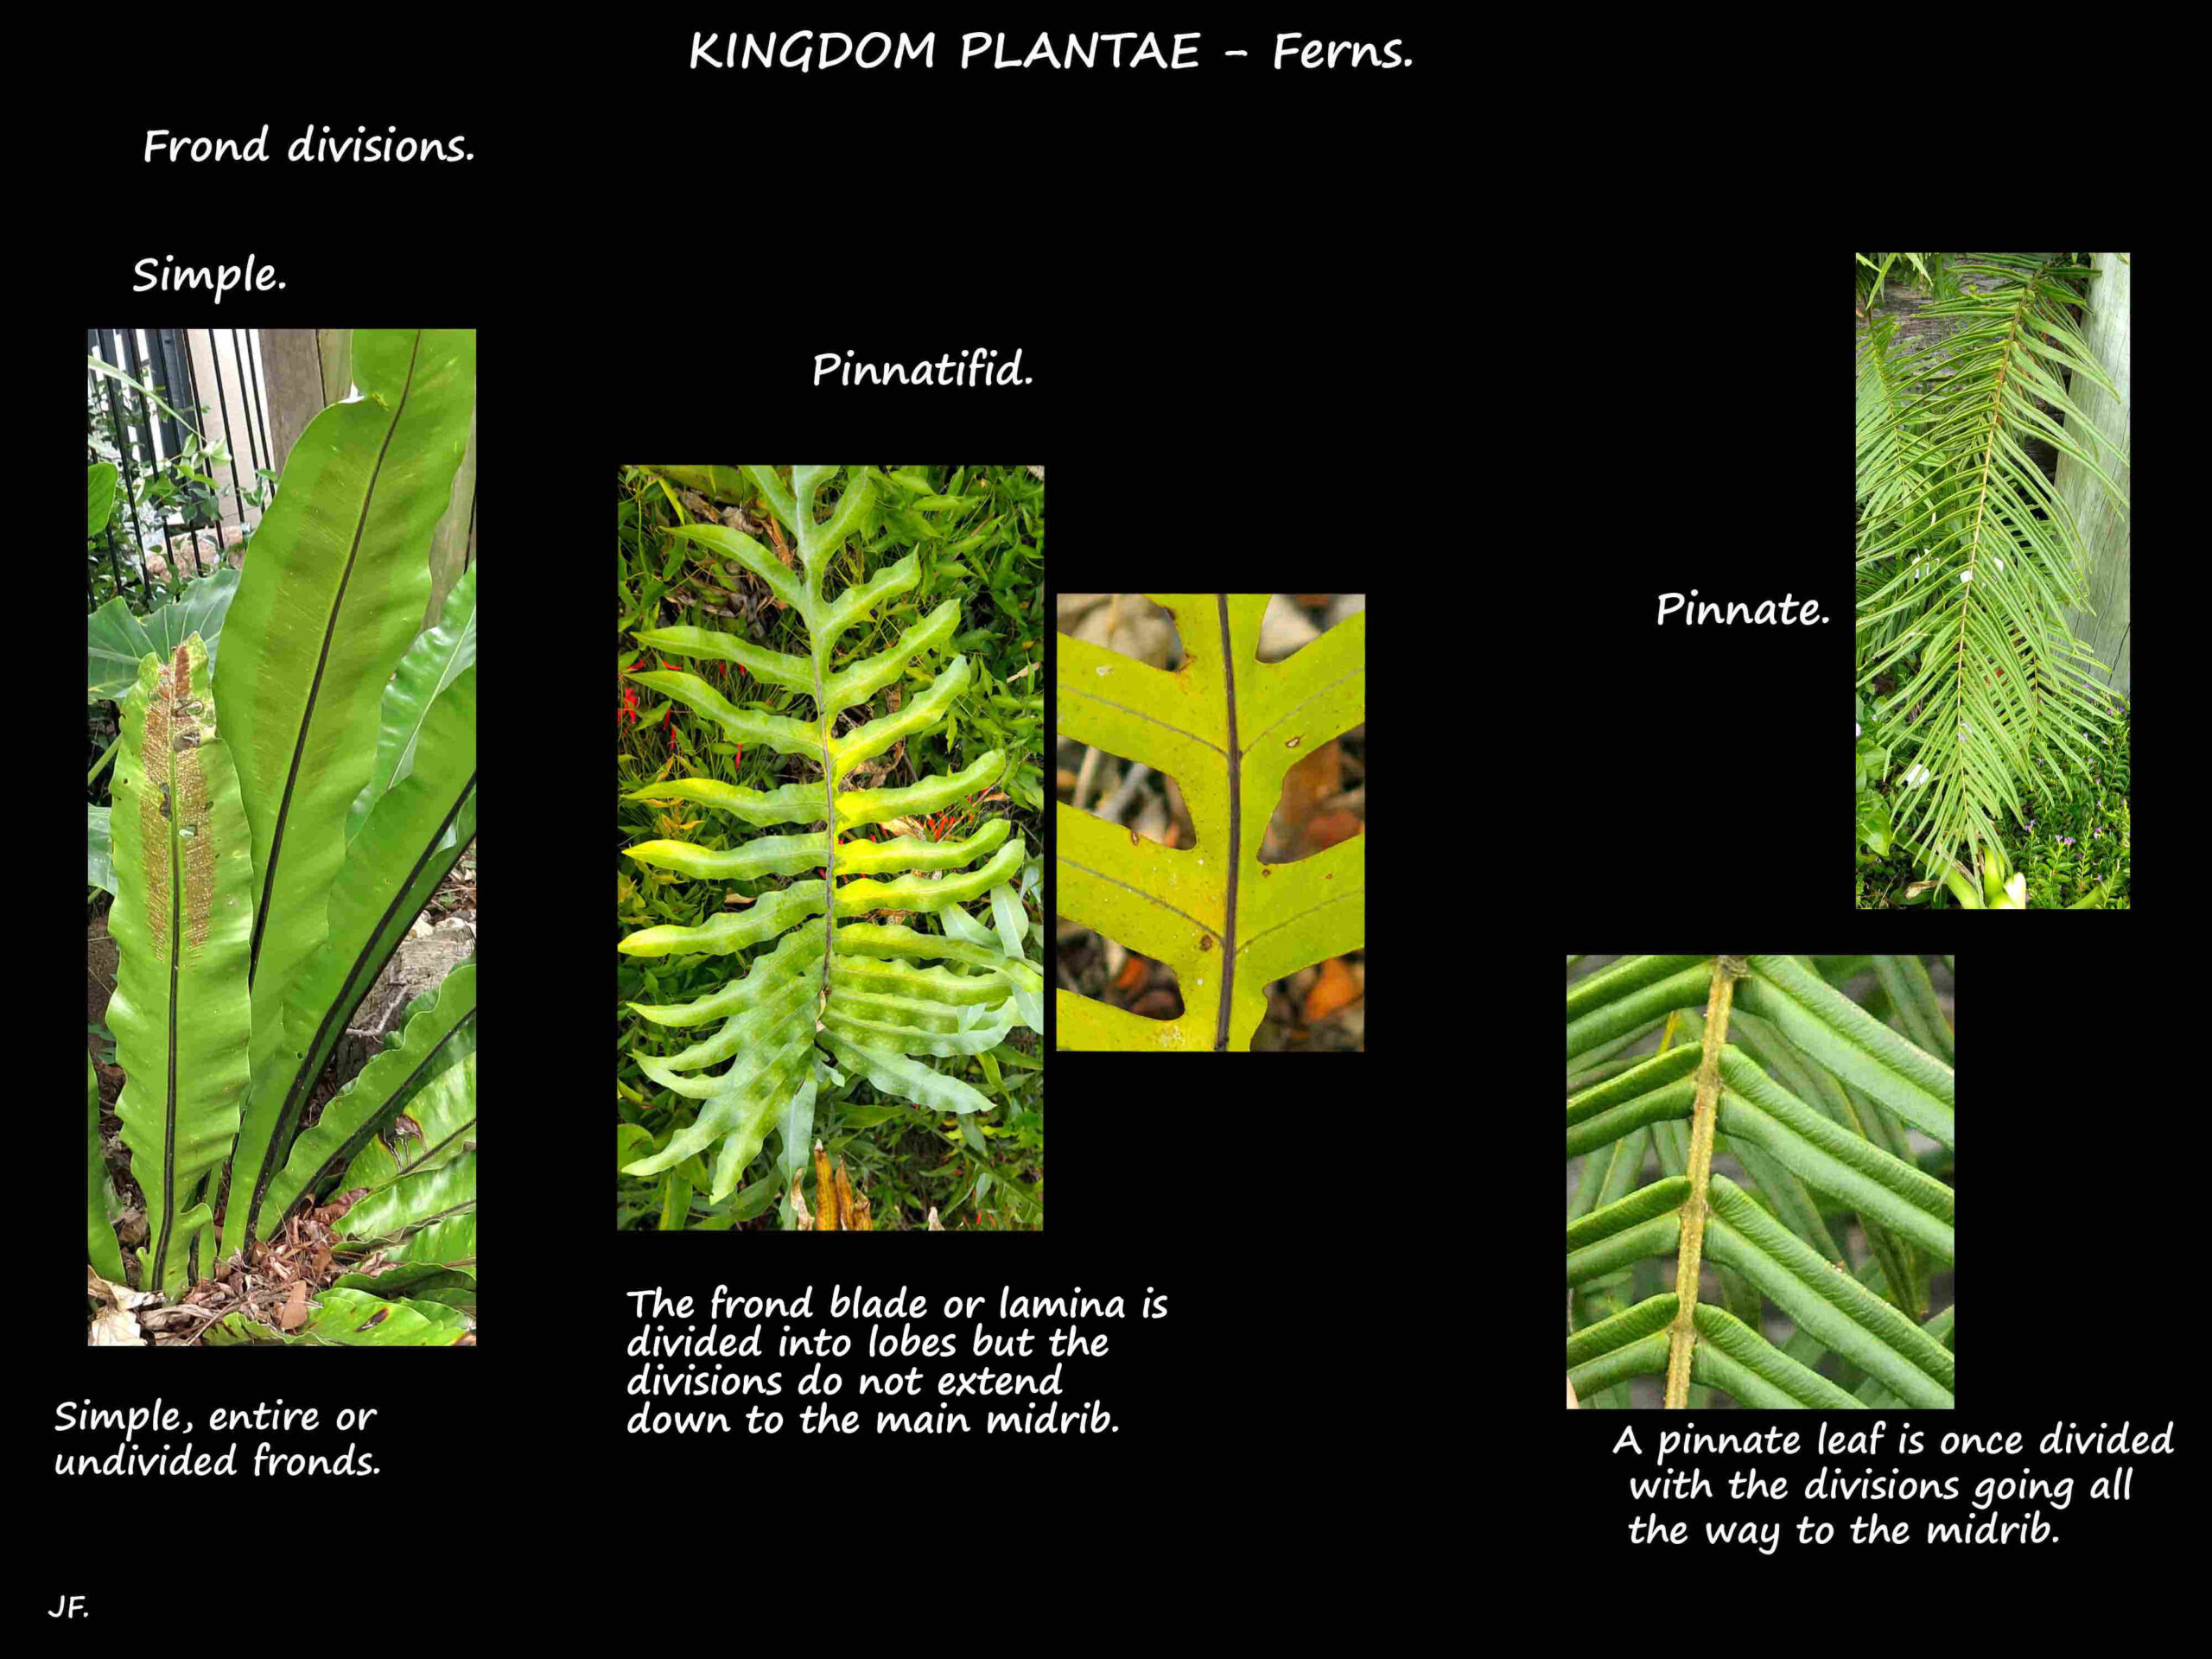 Frond divisions